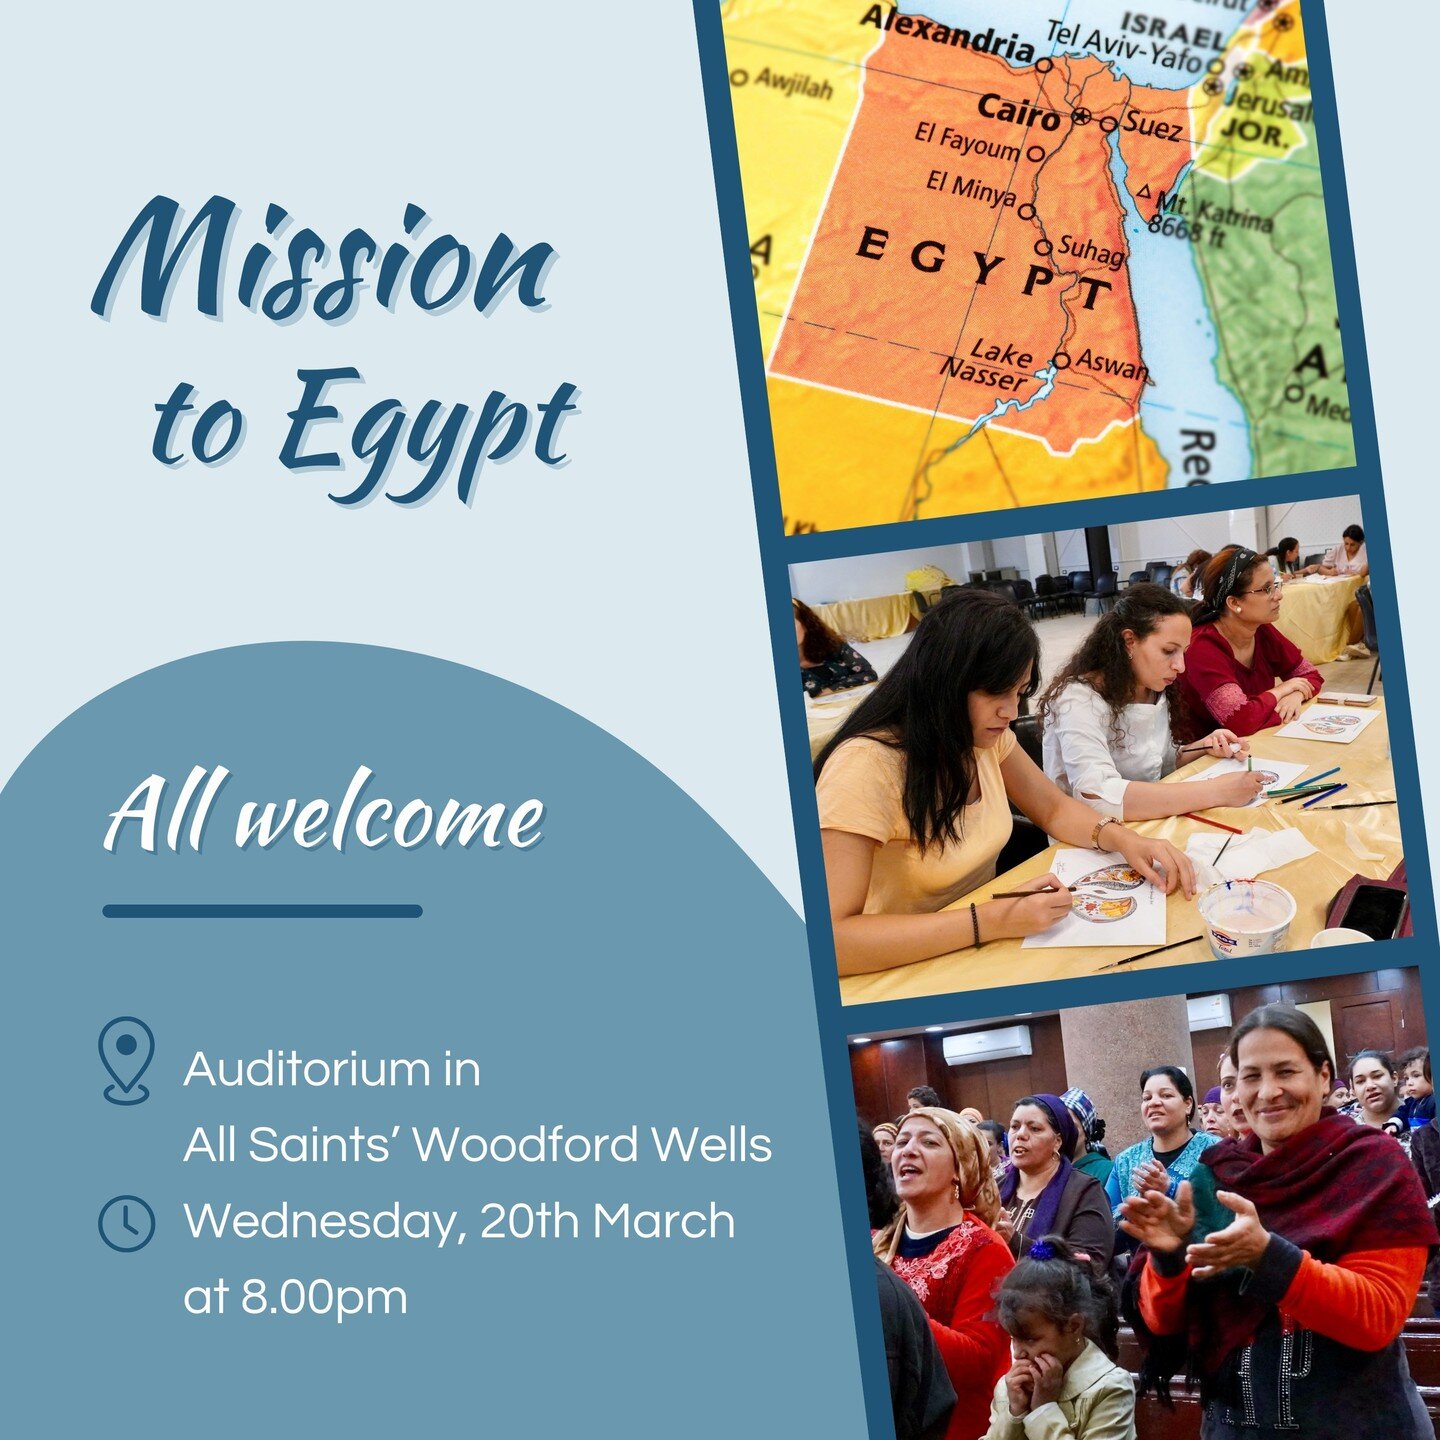 We would like to invite you to our Evening where we will be sharing updates about our work and our plans to go back to Egypt. Please come along, be encouraged by what God is doing and join us in prayer. The Event is in the Auditorium at All Saints' W